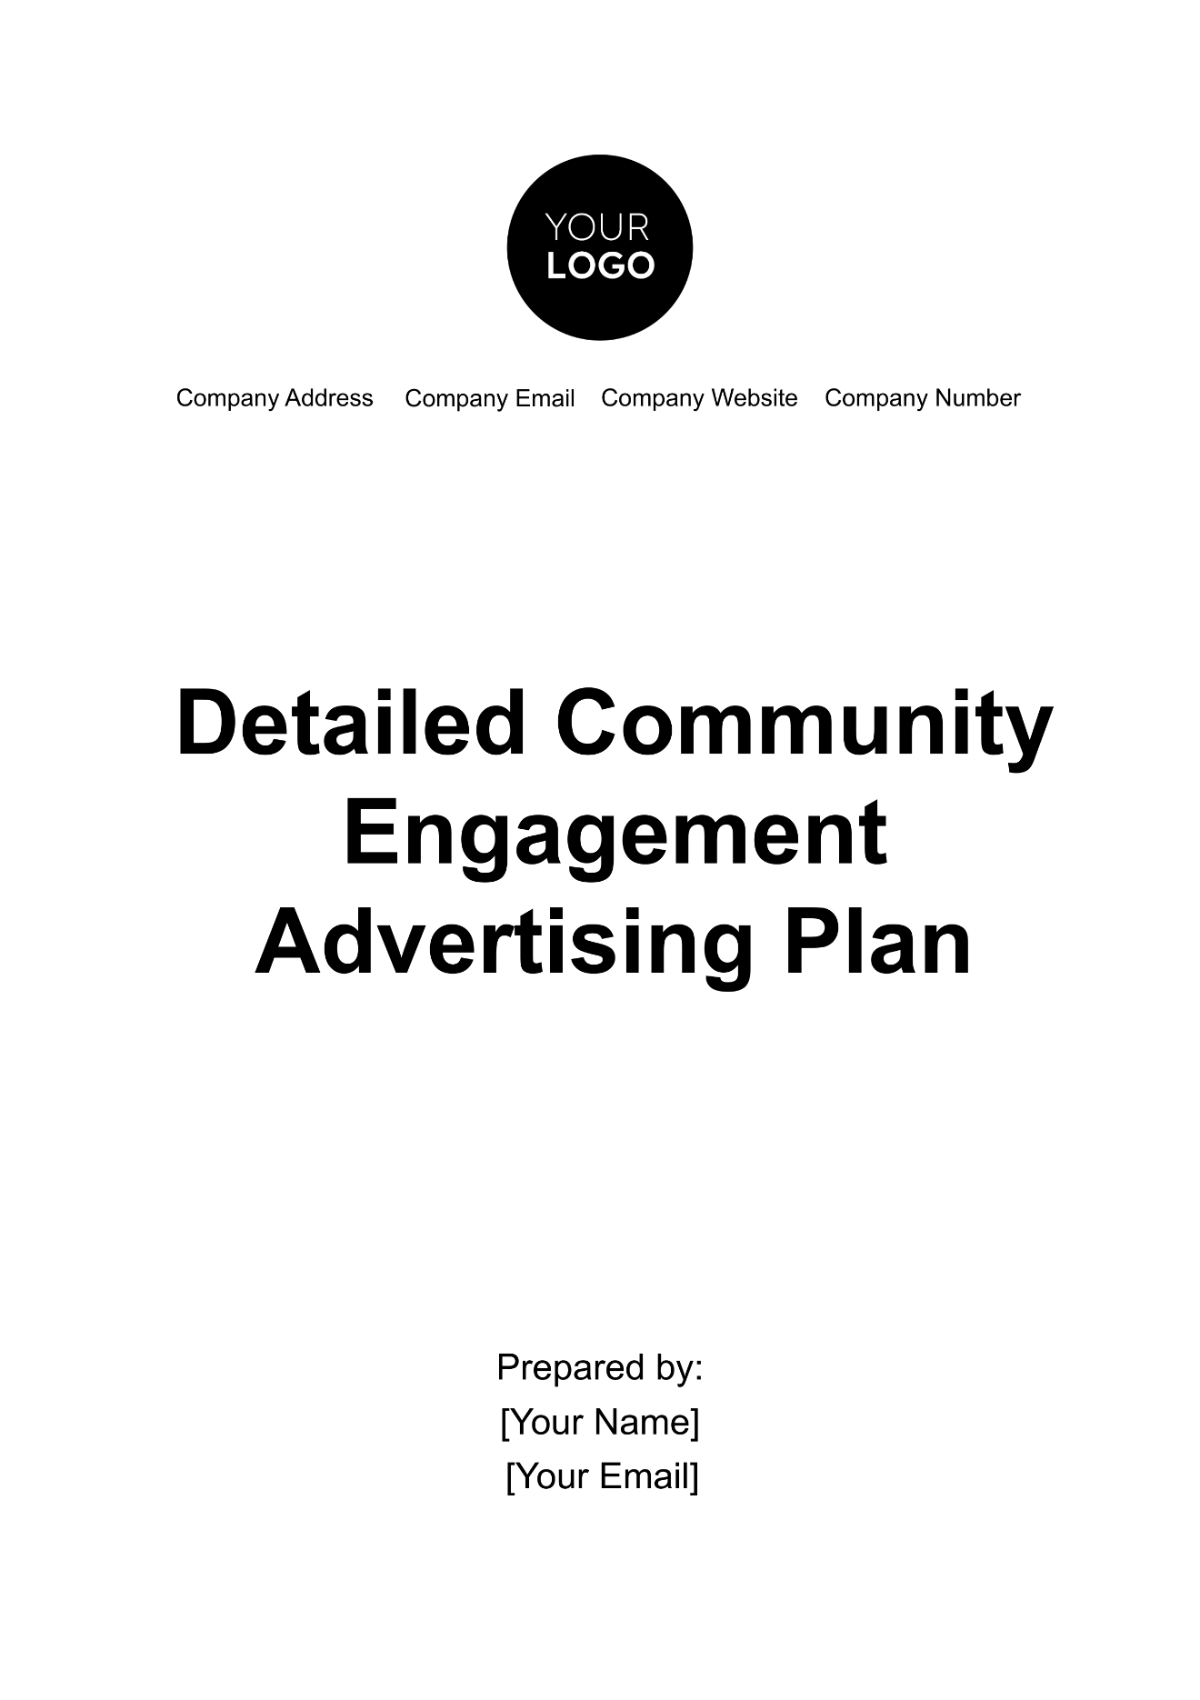 Detailed Community Engagement Advertising Plan Template